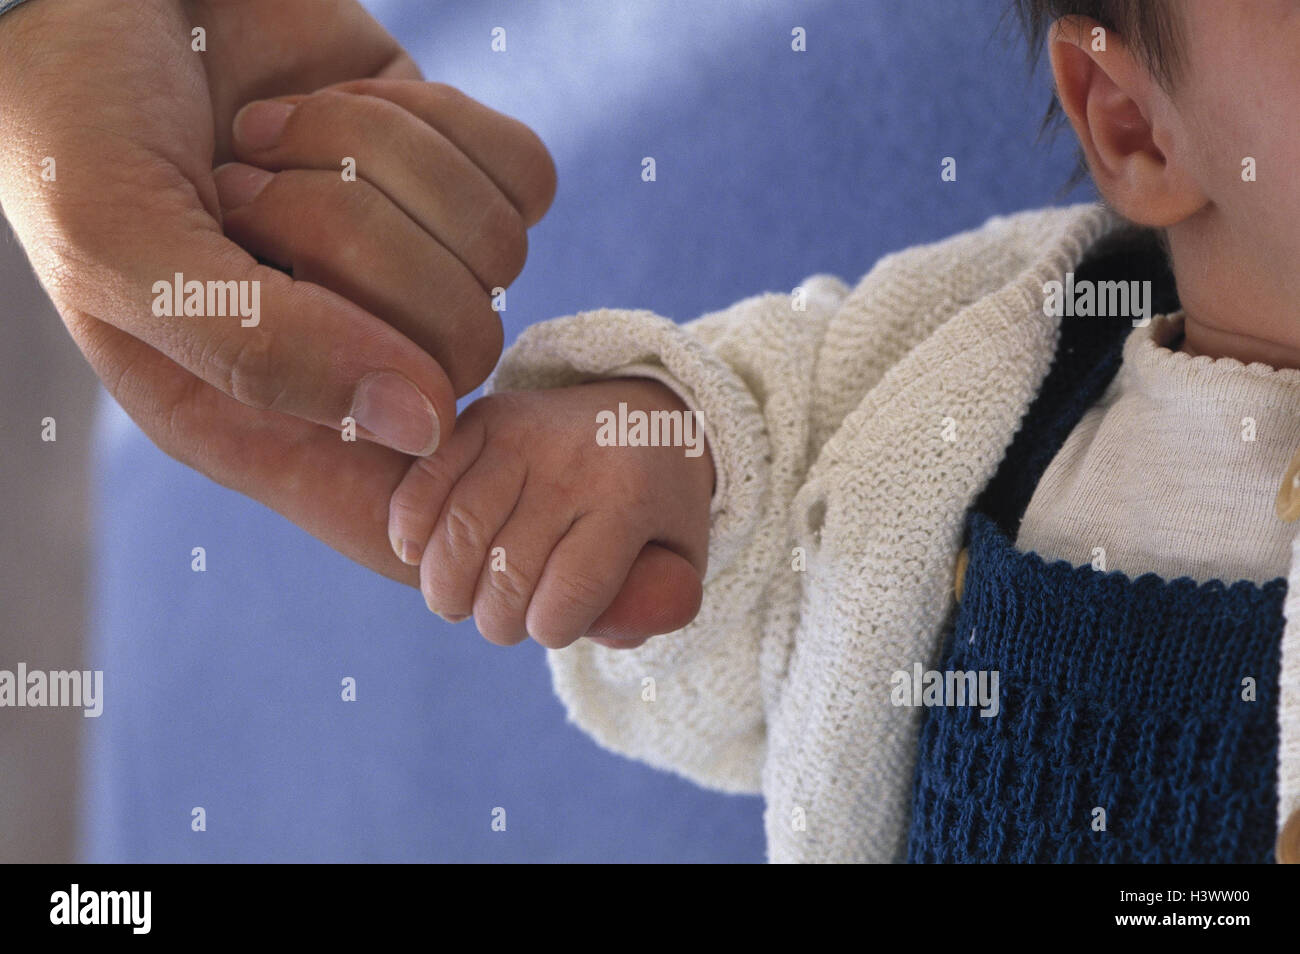 Baby, lie, detail, hand, nut, finger, stick, at home, woman, women's hand, child, baby hand, affection, tenderness, affectionately, touch, touch, feel, hold, clinch, clip Stock Photo